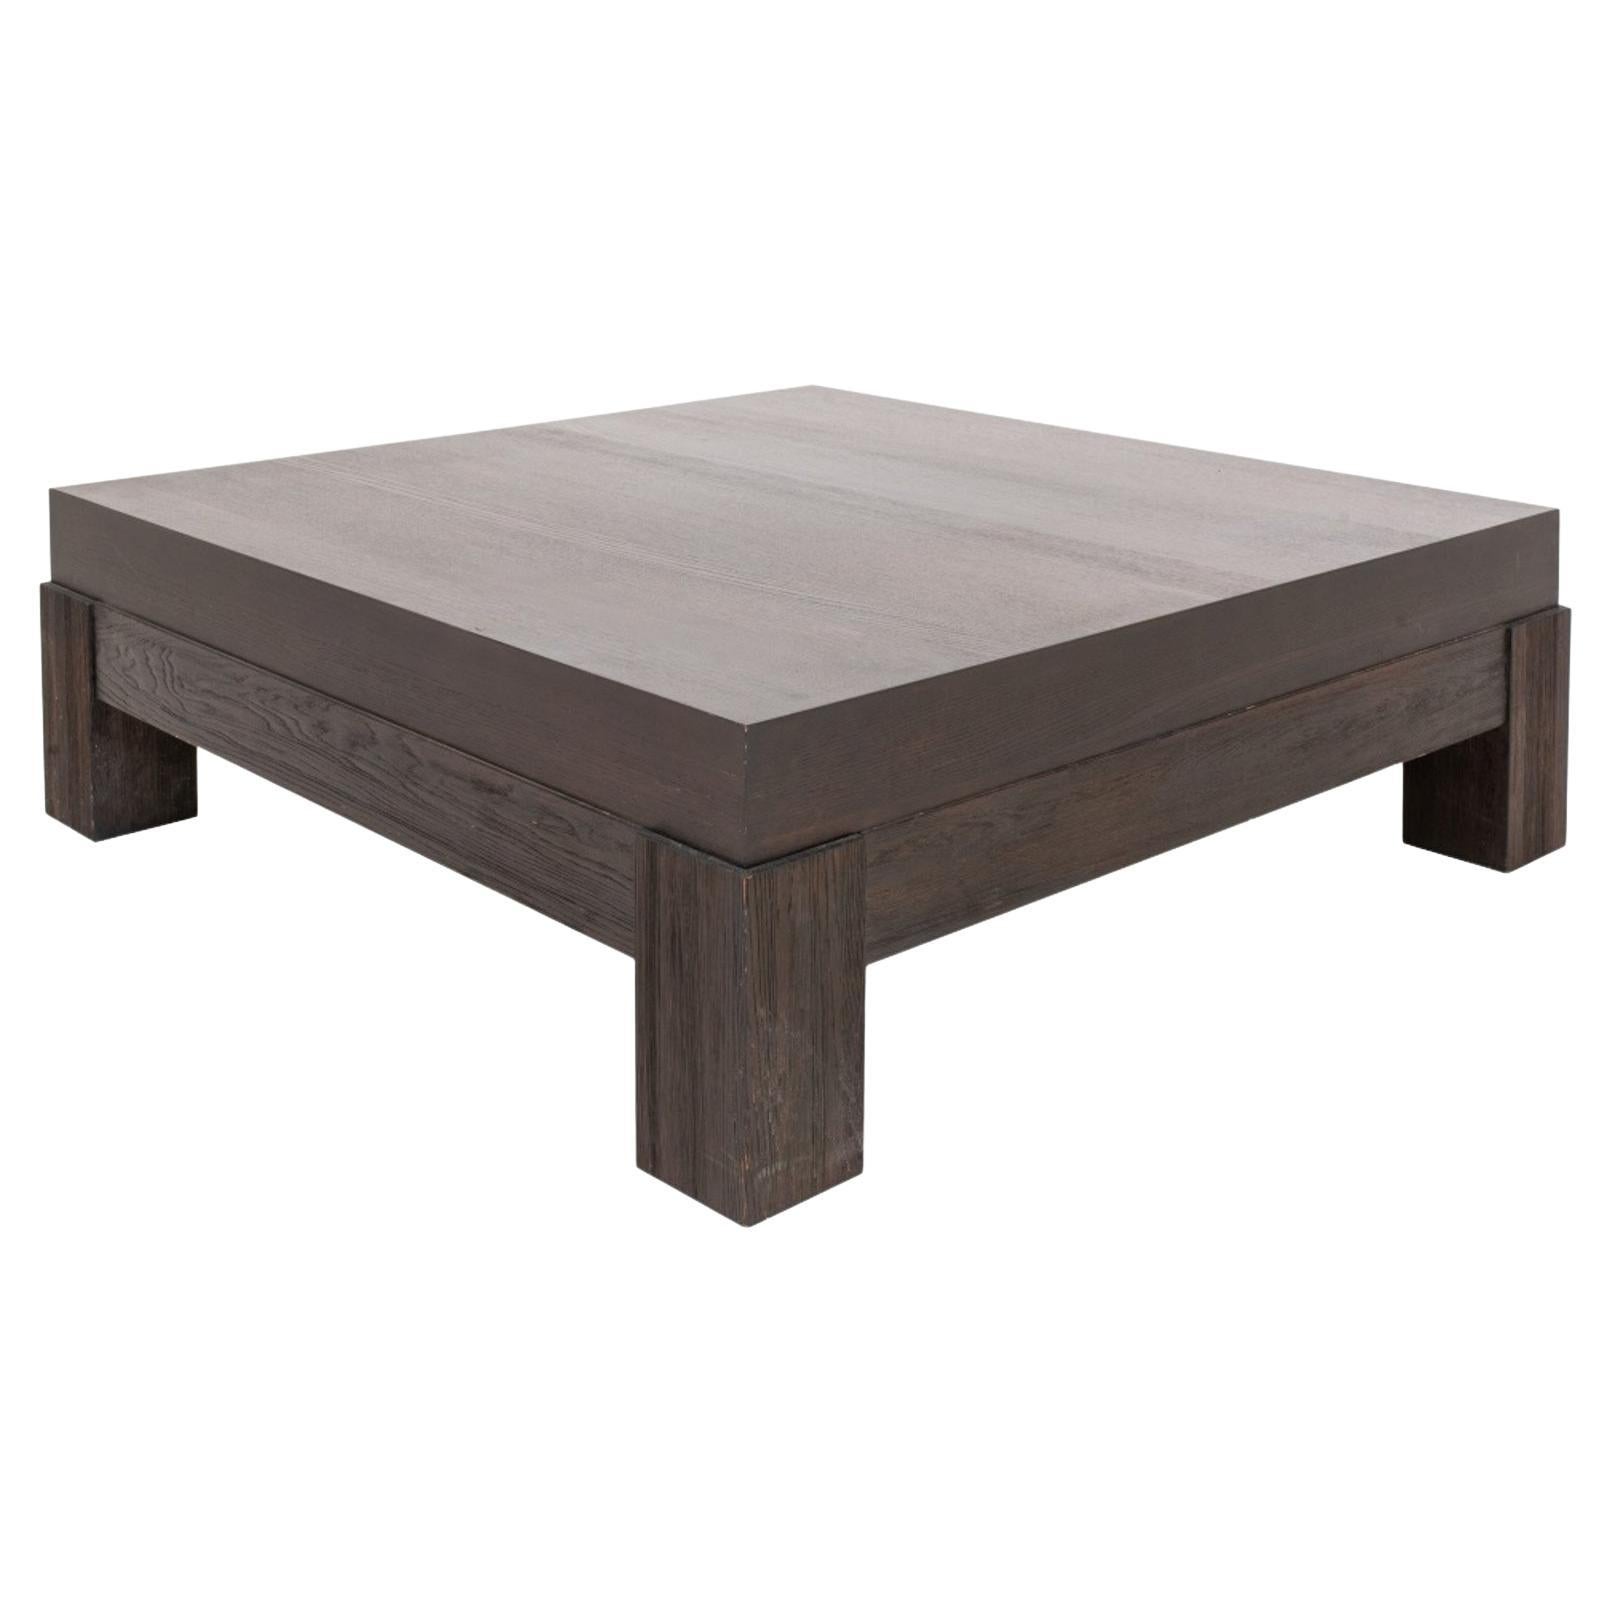 Square Wenge-Stained Oak Low Table